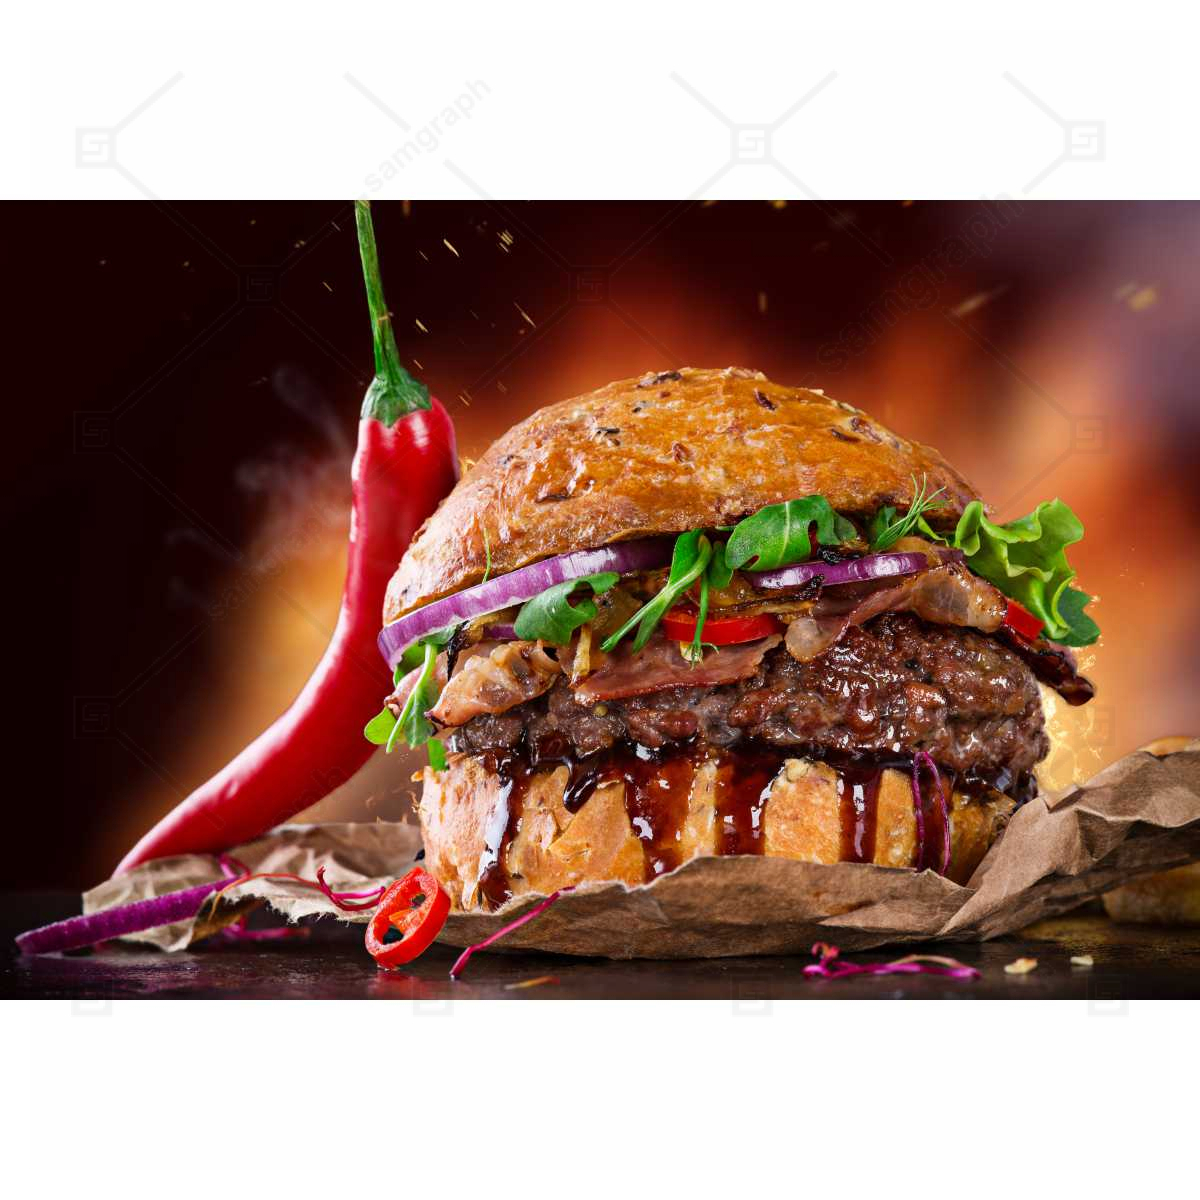 High quality photo of juicy hamburger with fire and pepper lettuce onion parsley 1 حلقه ازدوج نگیندار جواهری